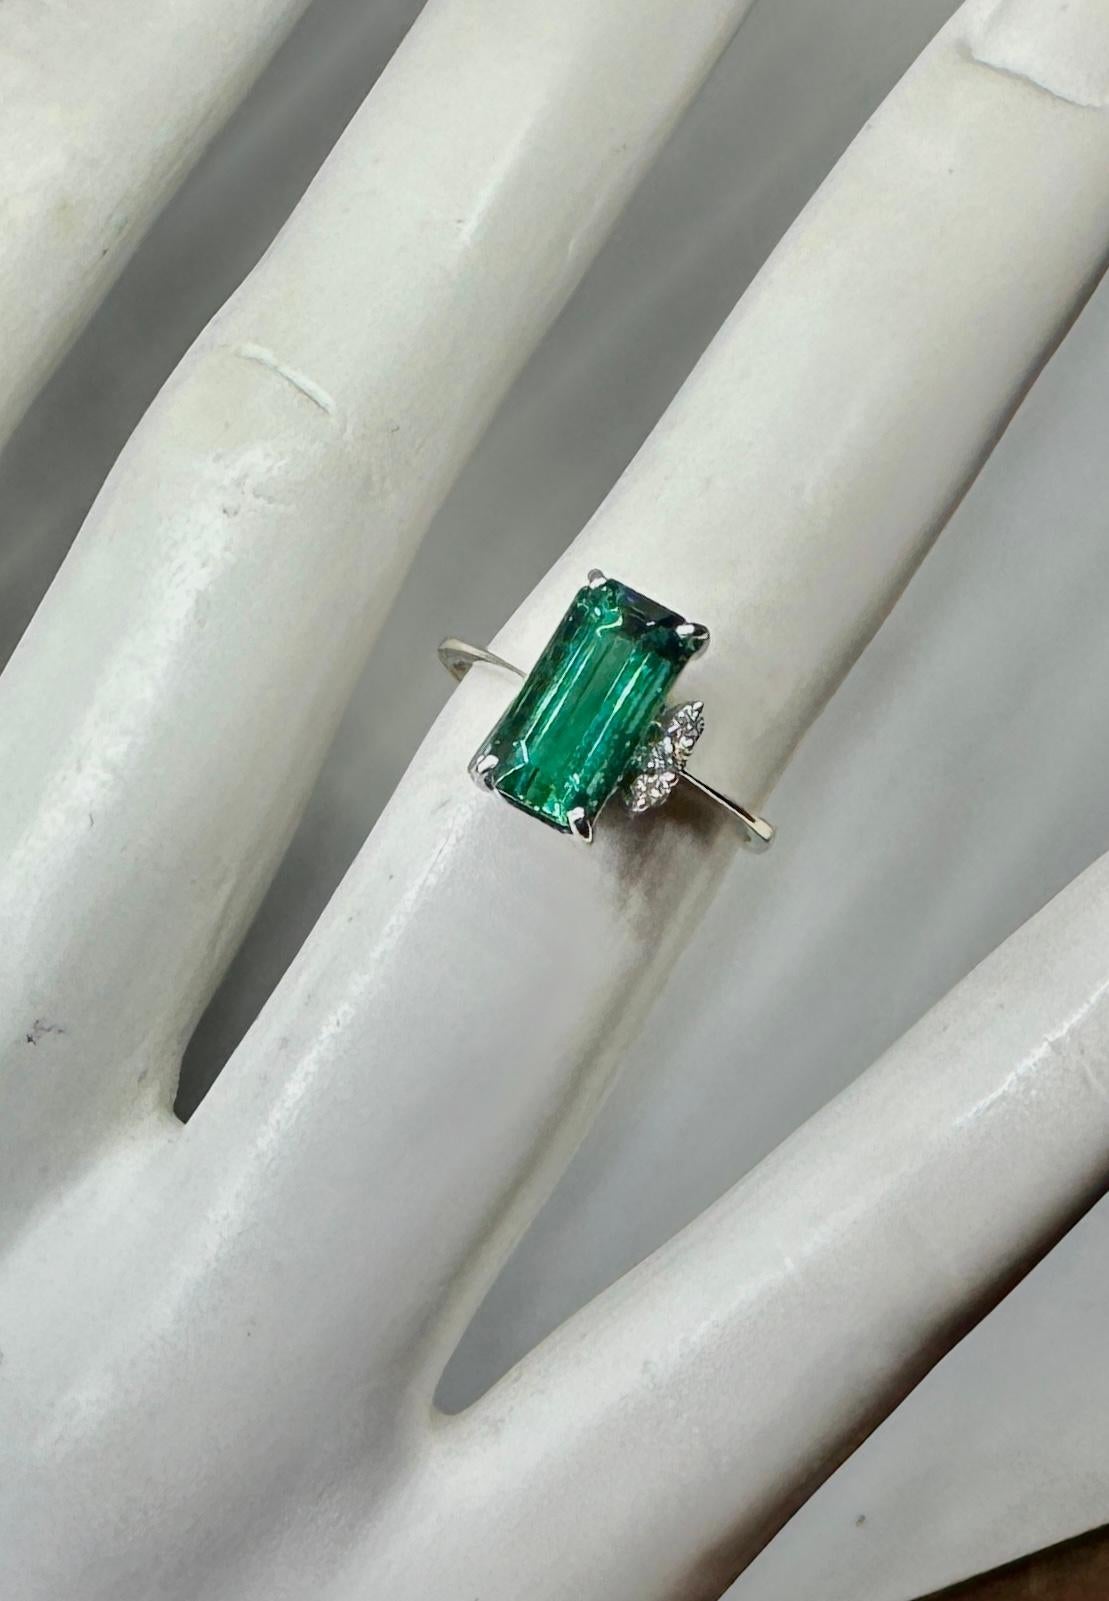 Green Tourmaline Diamond Ring 18 Karat White Gold Engagement Cocktail Ring In Excellent Condition For Sale In New York, NY